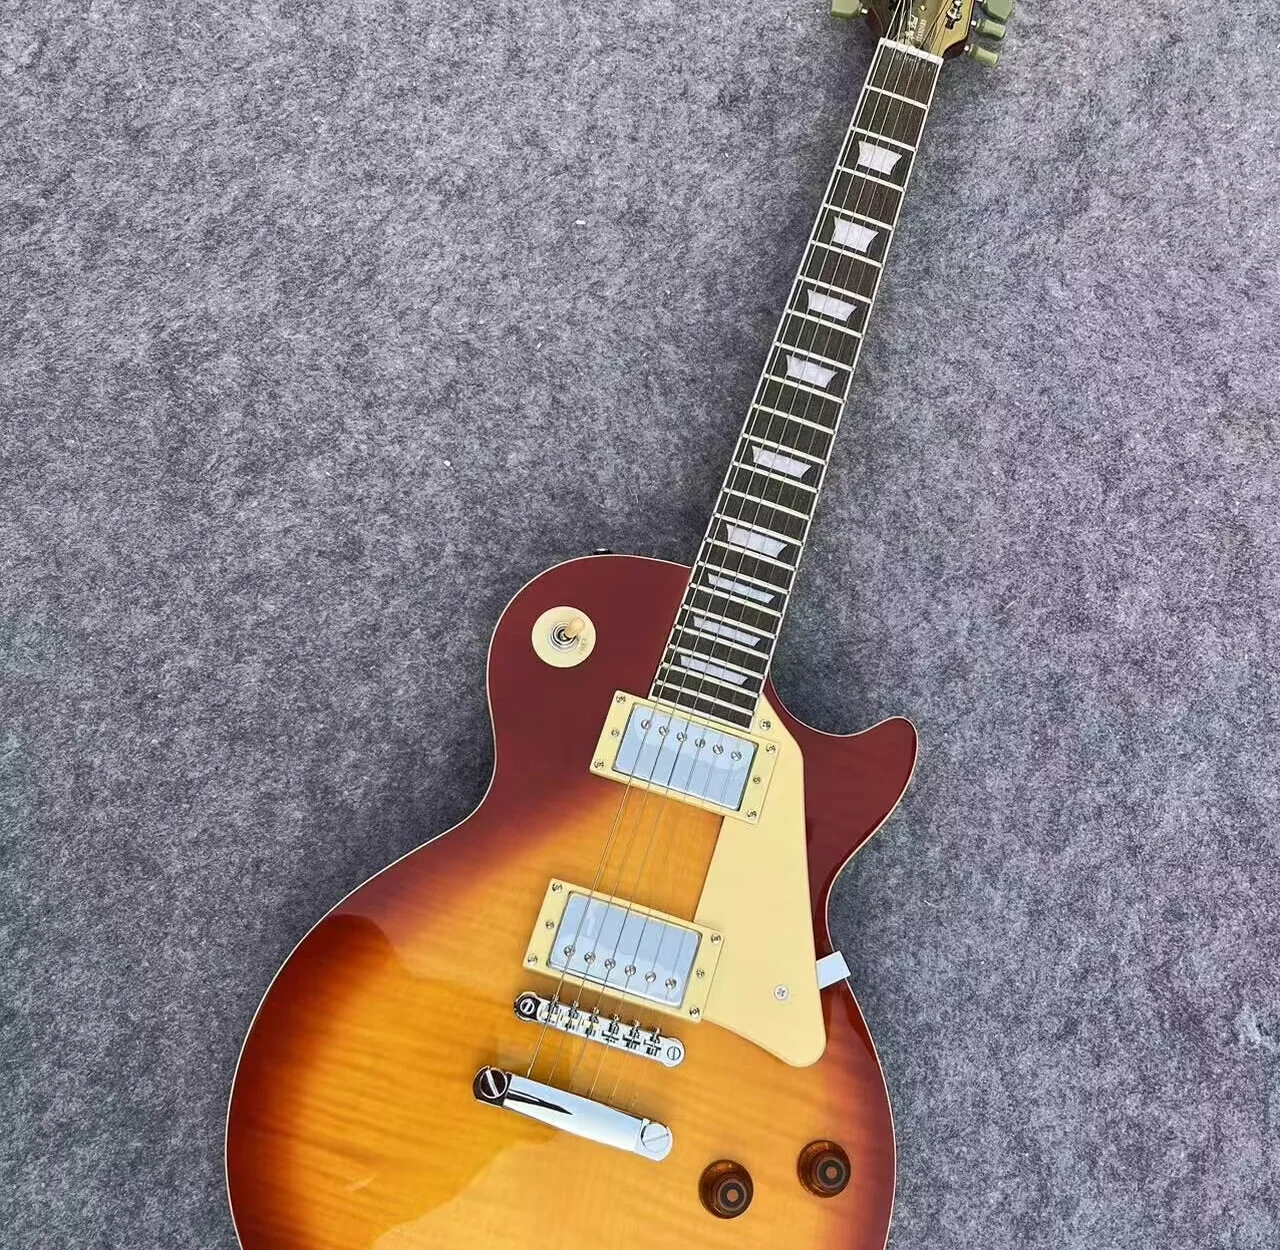 

Relic Electric Guitar Flamed Maple Top 1959 Tribute to Gary Moore Peter Green Smoked Sunburst One Piece Body and Neck SDAFGERFR